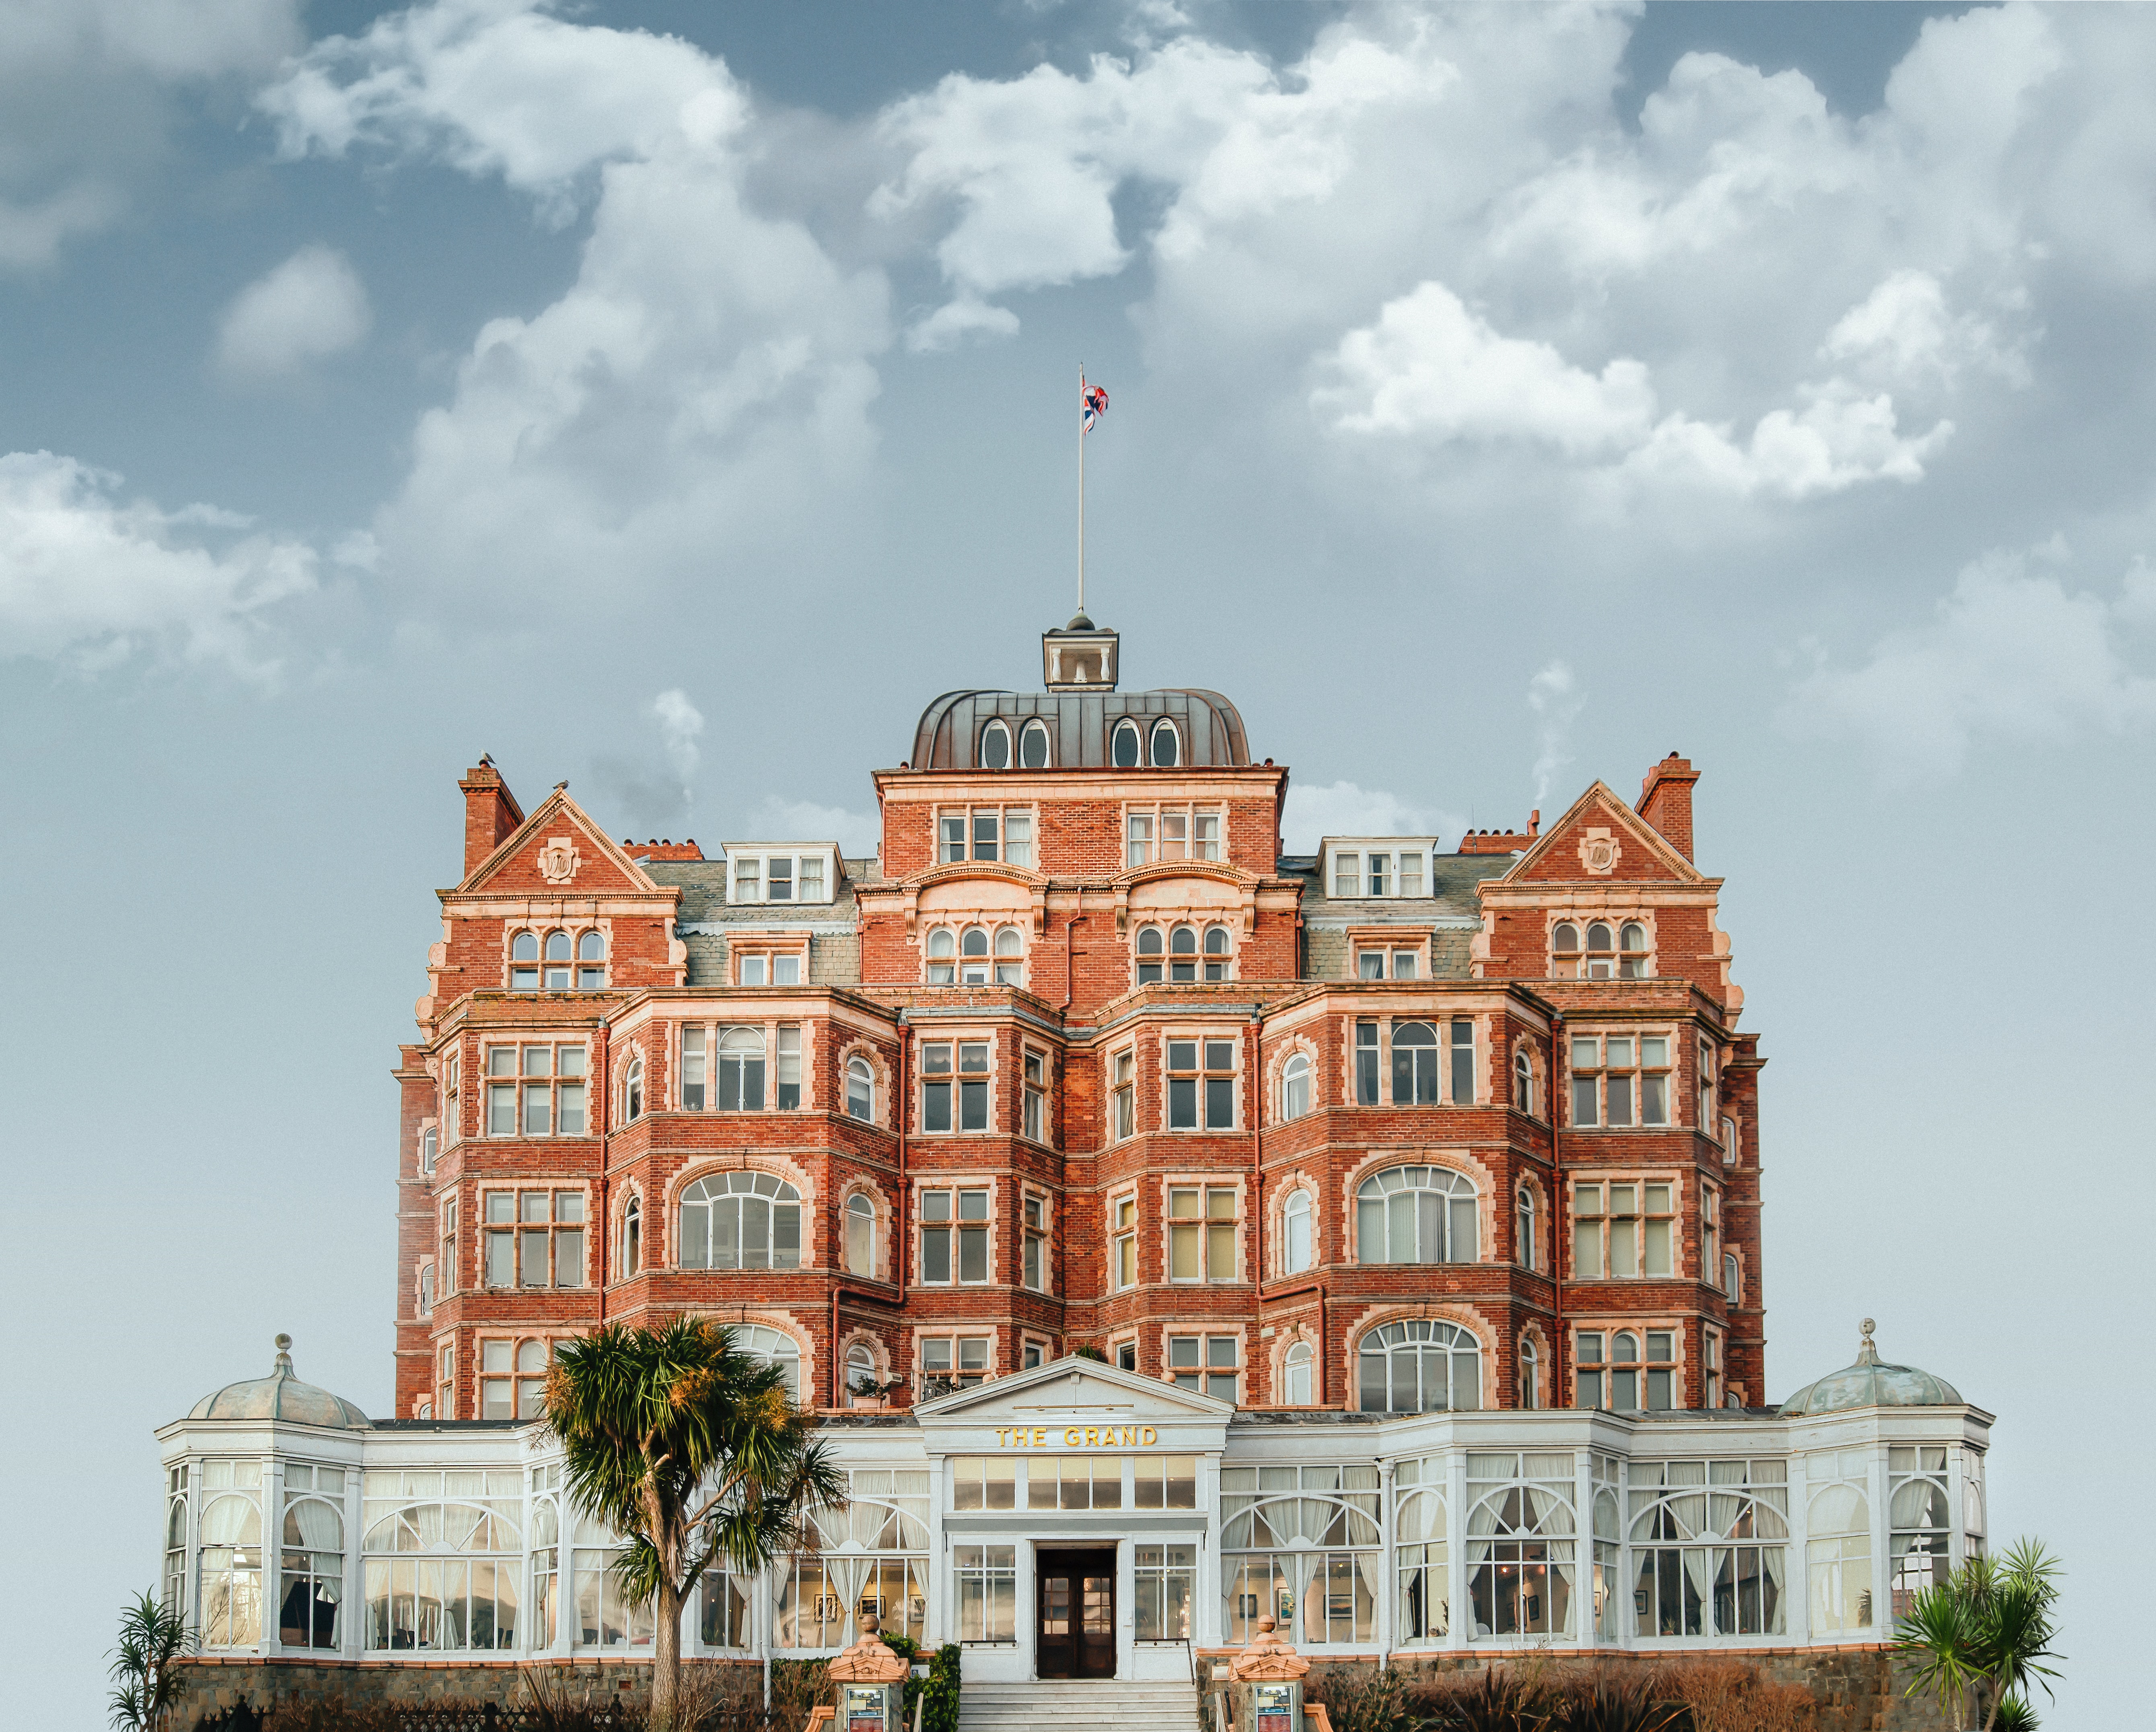 Hotel England Building Clouds 5360x4306